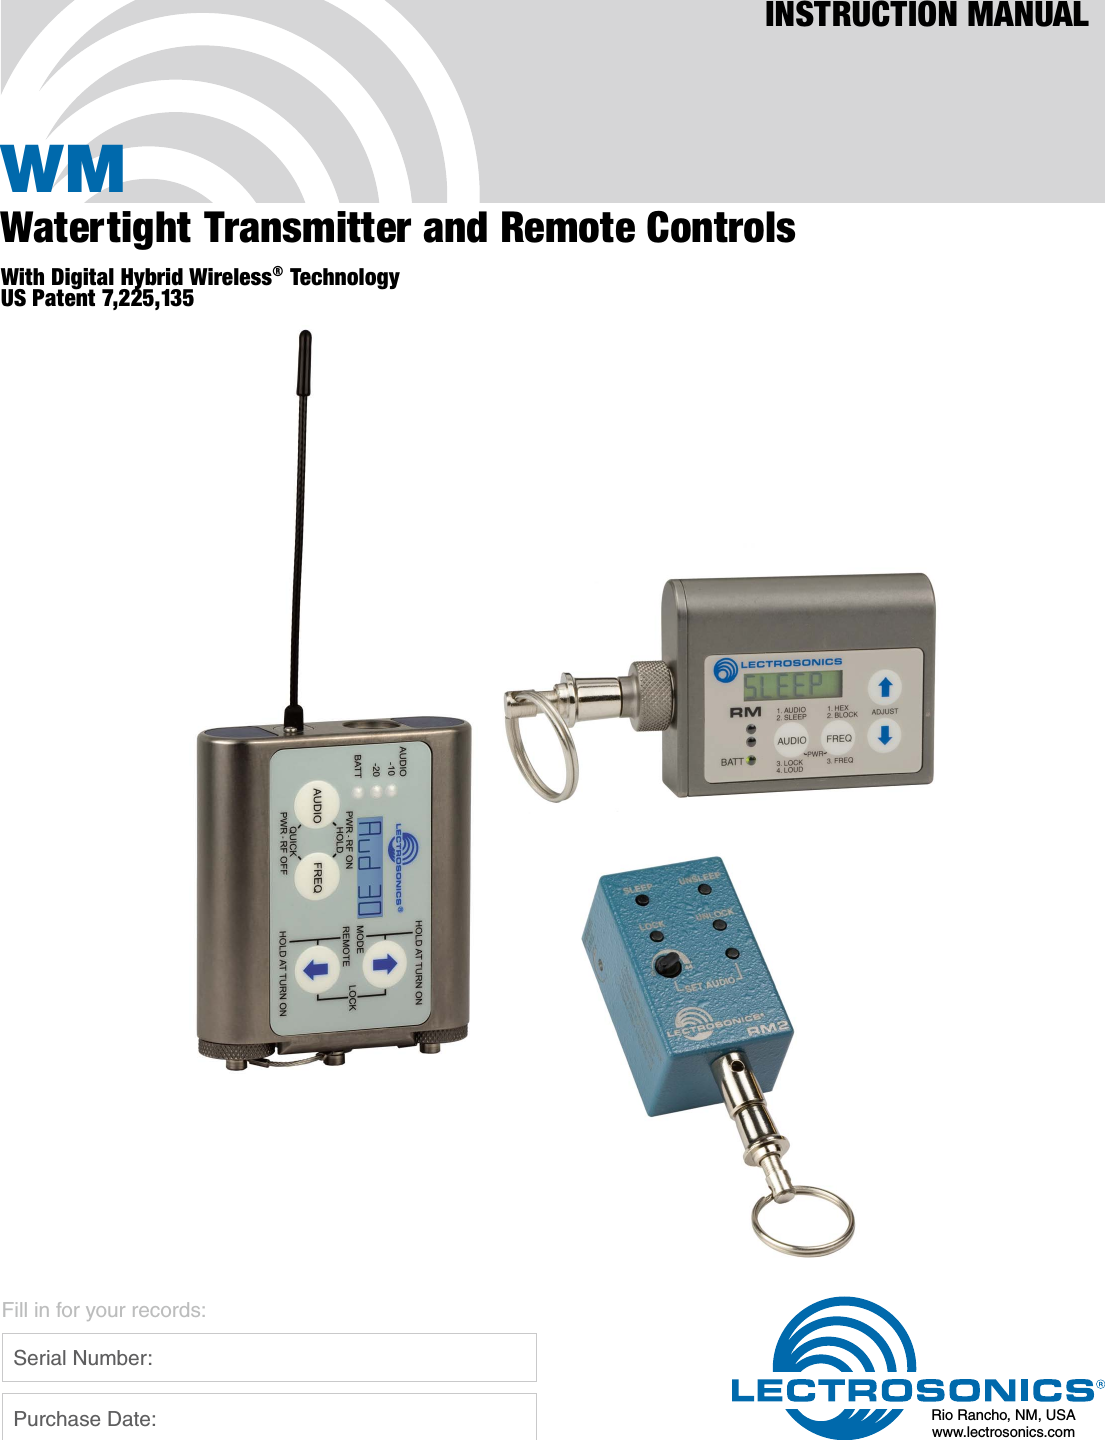 WMWatertight Transmitter and Remote ControlsWith Digital Hybrid Wireless® TechnologyINSTRUCTION MANUALRio Rancho, NM, USAwww.lectrosonics.comFill in for your records:  Serial Number:  Purchase Date:US Patent 7,225,135